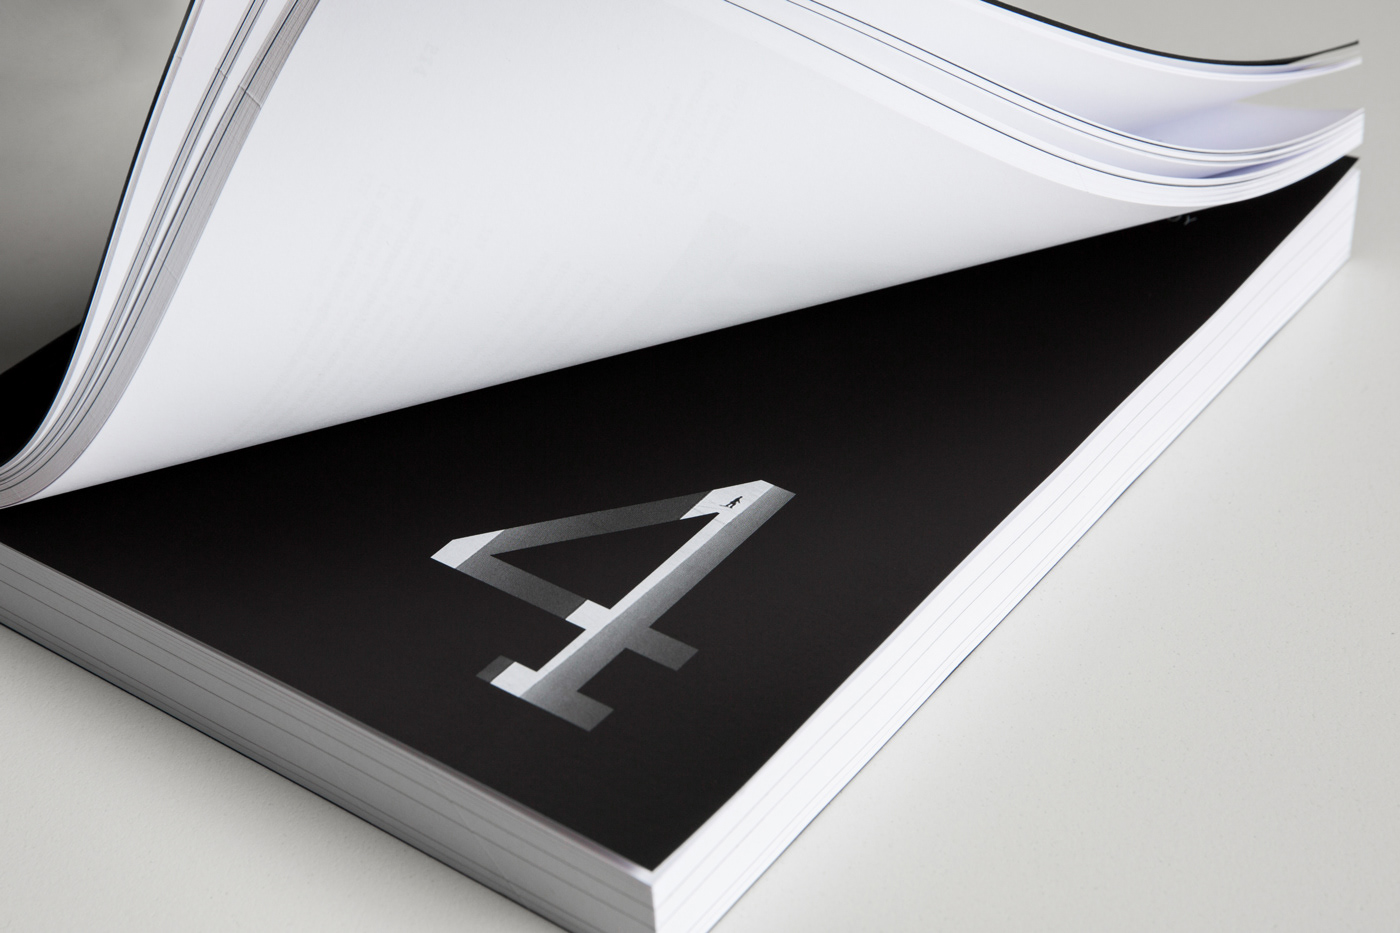 editorial Bookdesign Photography  architecture black White case phd Urban Layout